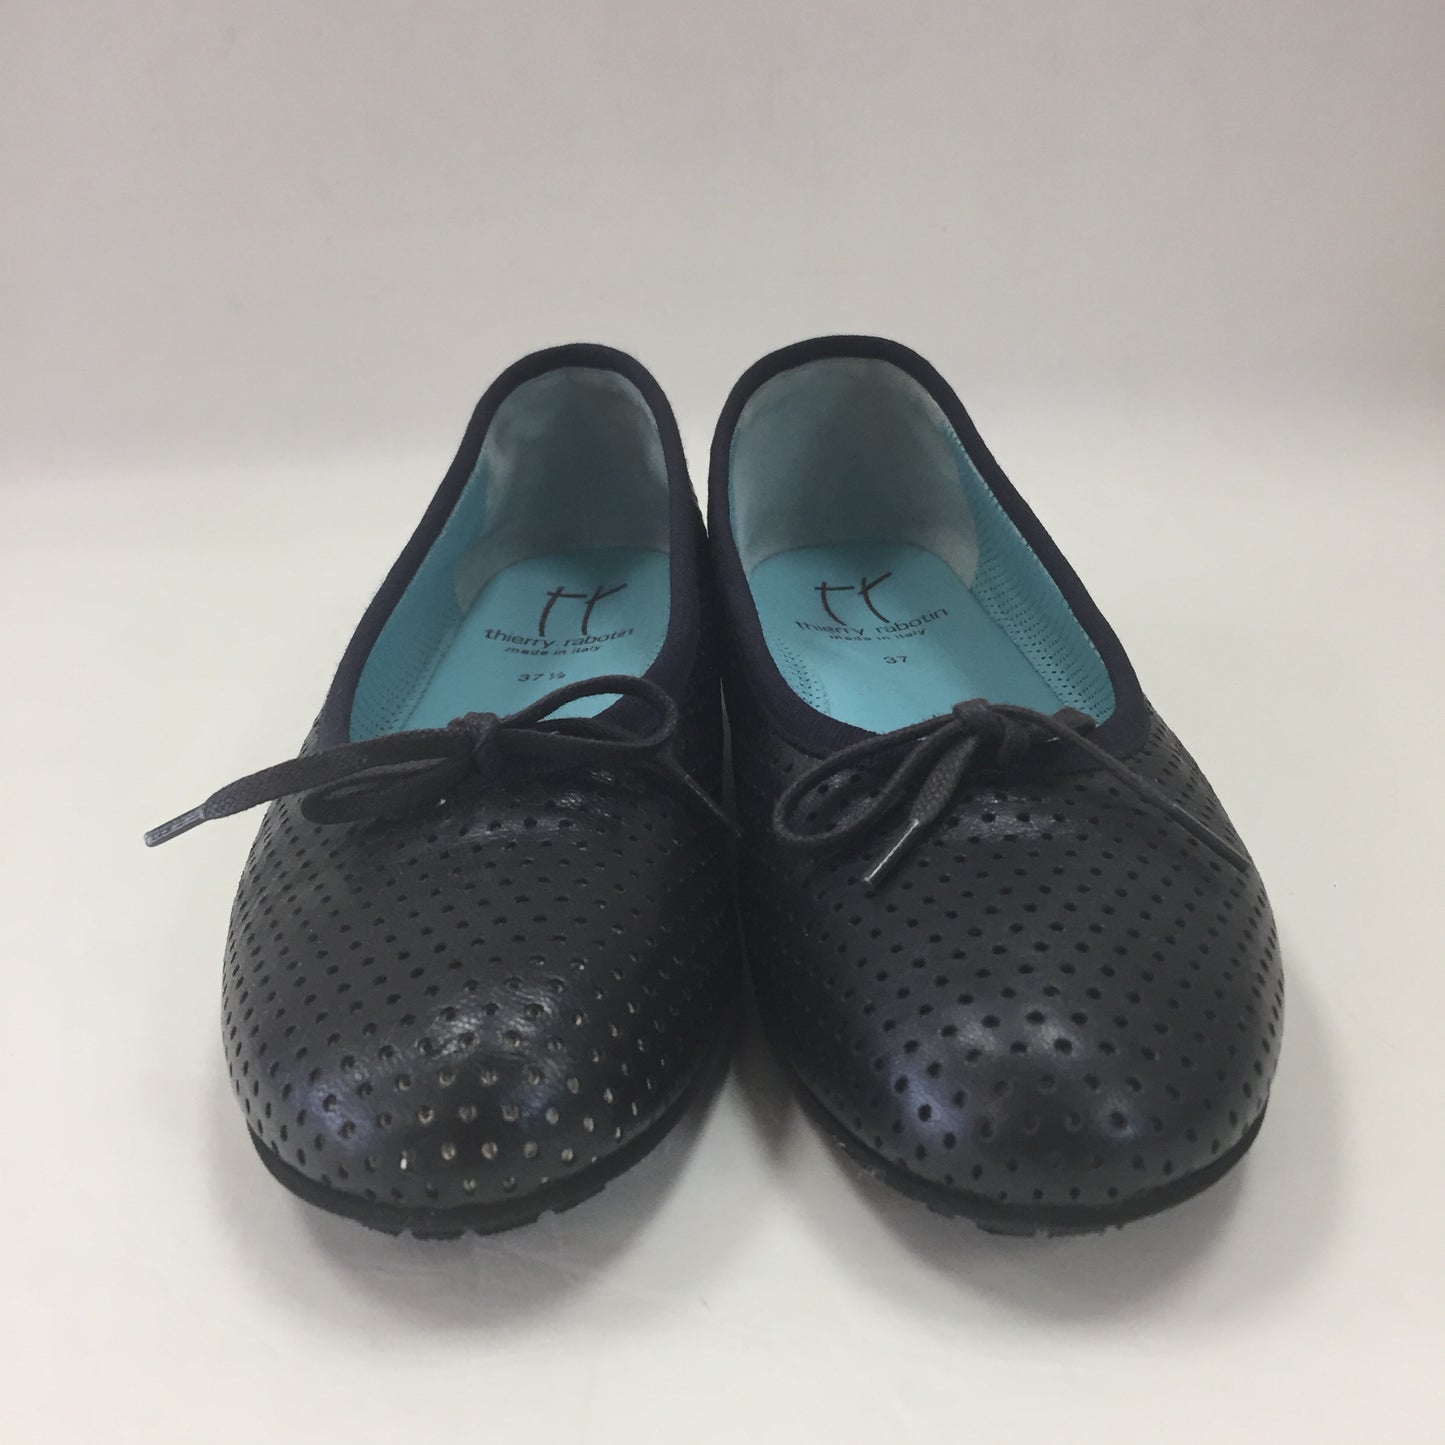 Authentic Thierry Rabotin Navy Perforated Flats Women's Size 37.5